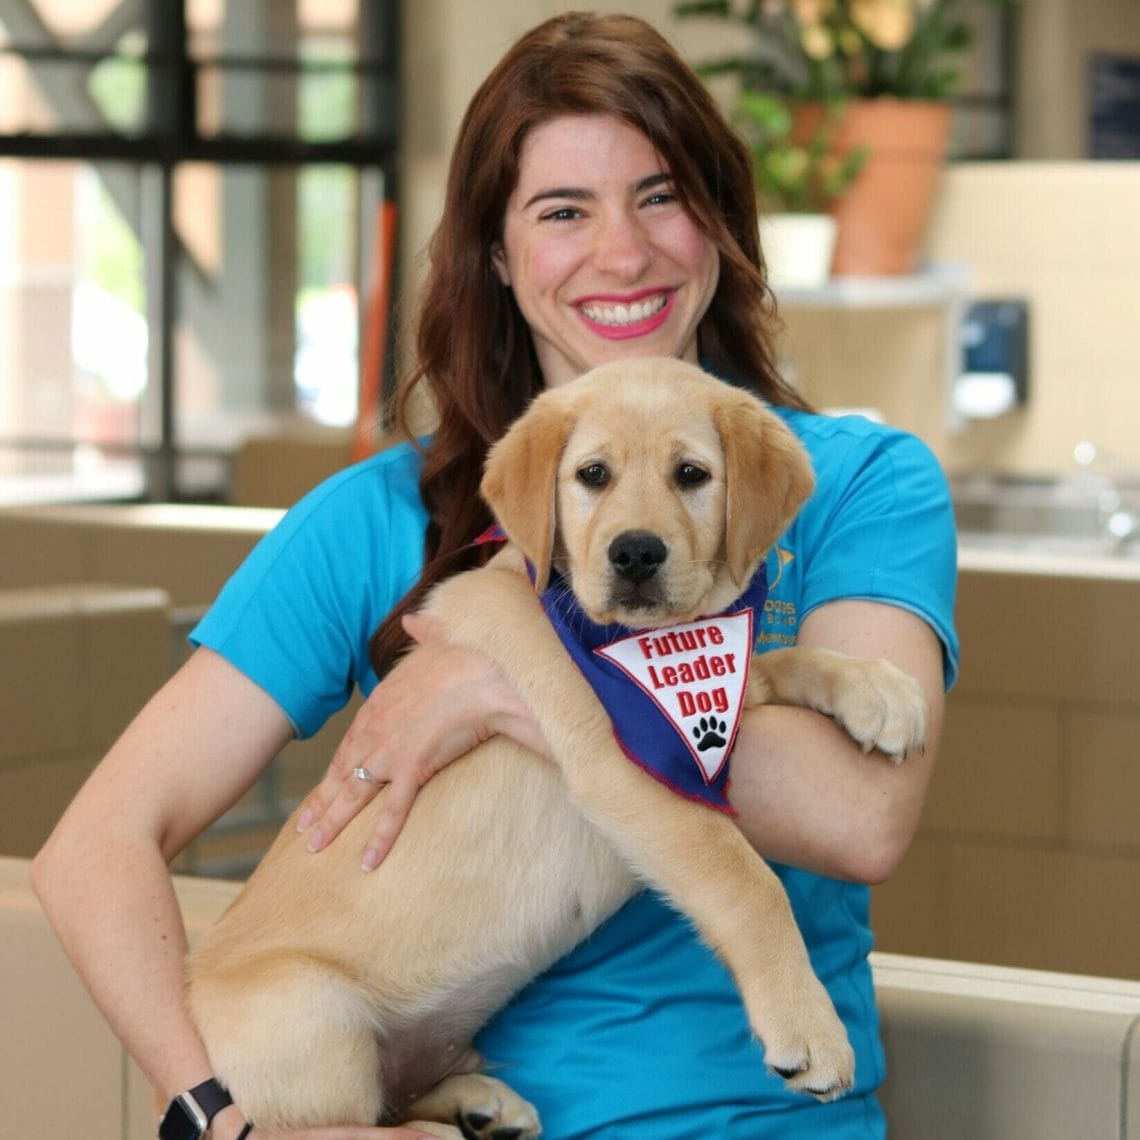 A woman with a big smile holding a yellow puppy with a Future Leader Dog bandana on